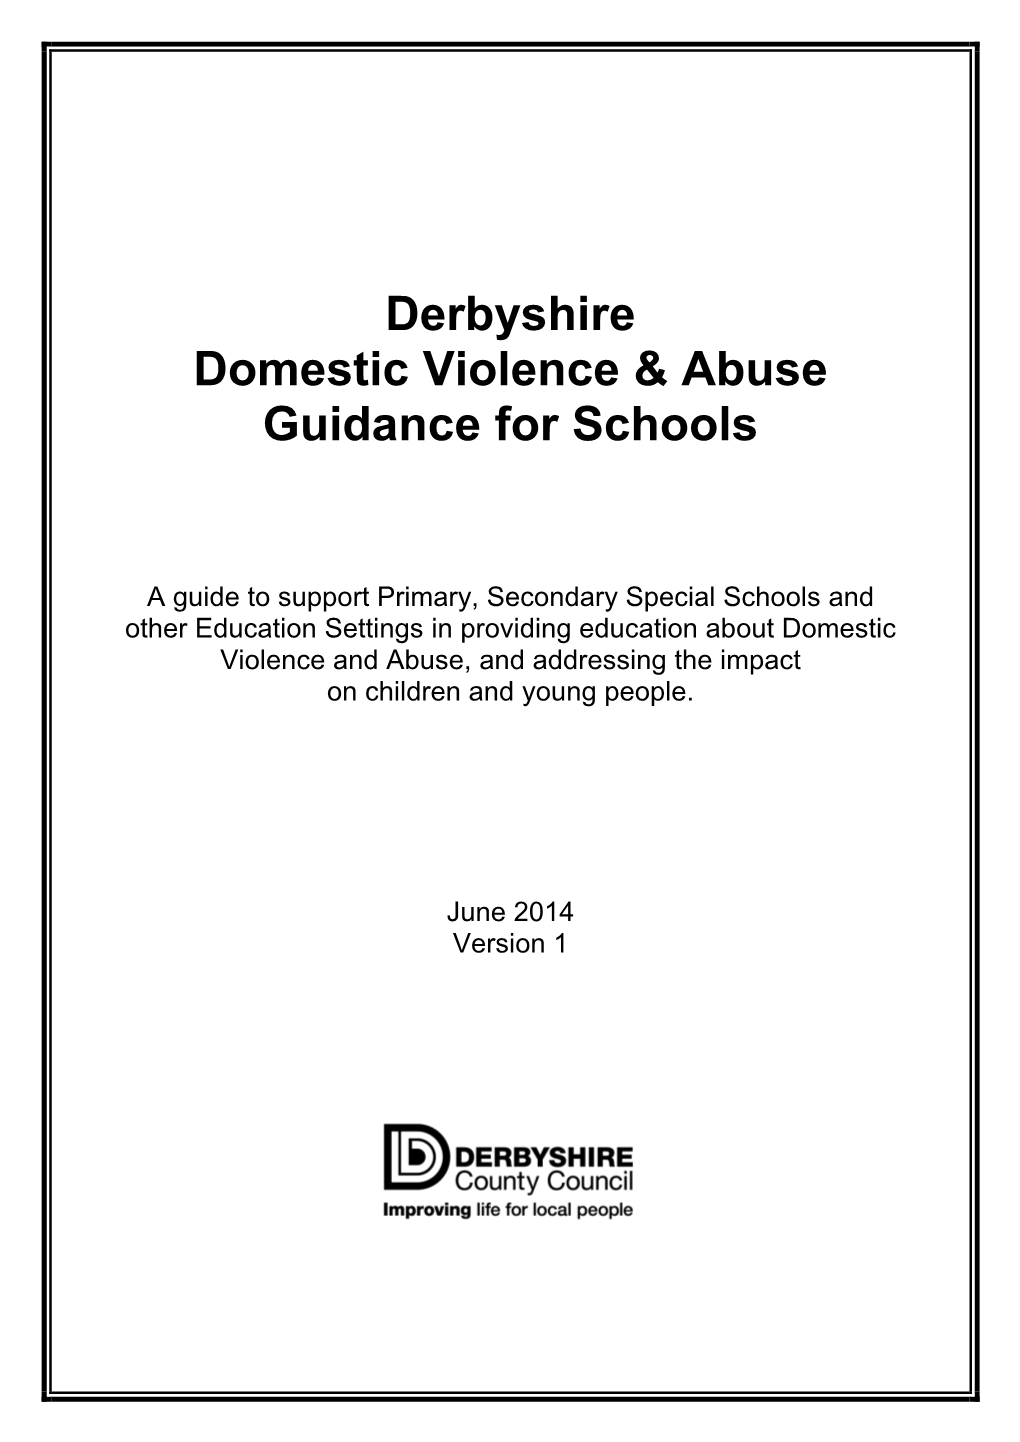 Derbyshire Domestic Violence & Abuse Guidance for Schools